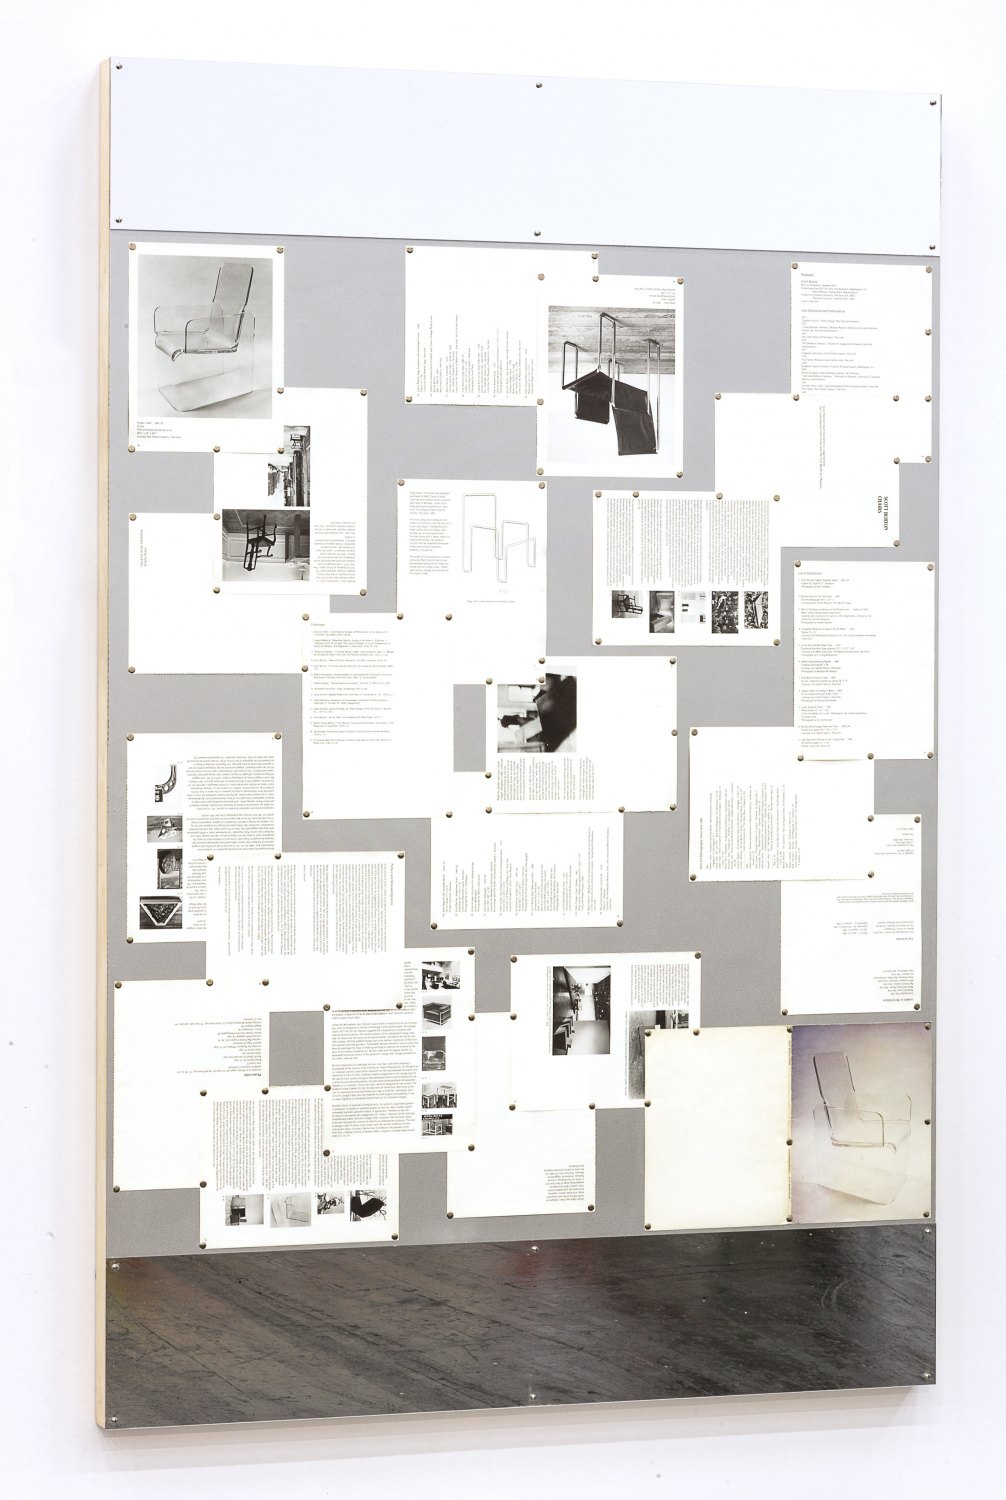 Tom Burr Circulation (In the winter of 1979), 2015 Inkjet prints on archival paper, steel push pins, mirrored plexiglas and acrylic paint on plywood panel, 183 x 120.5 x 6.5 cm